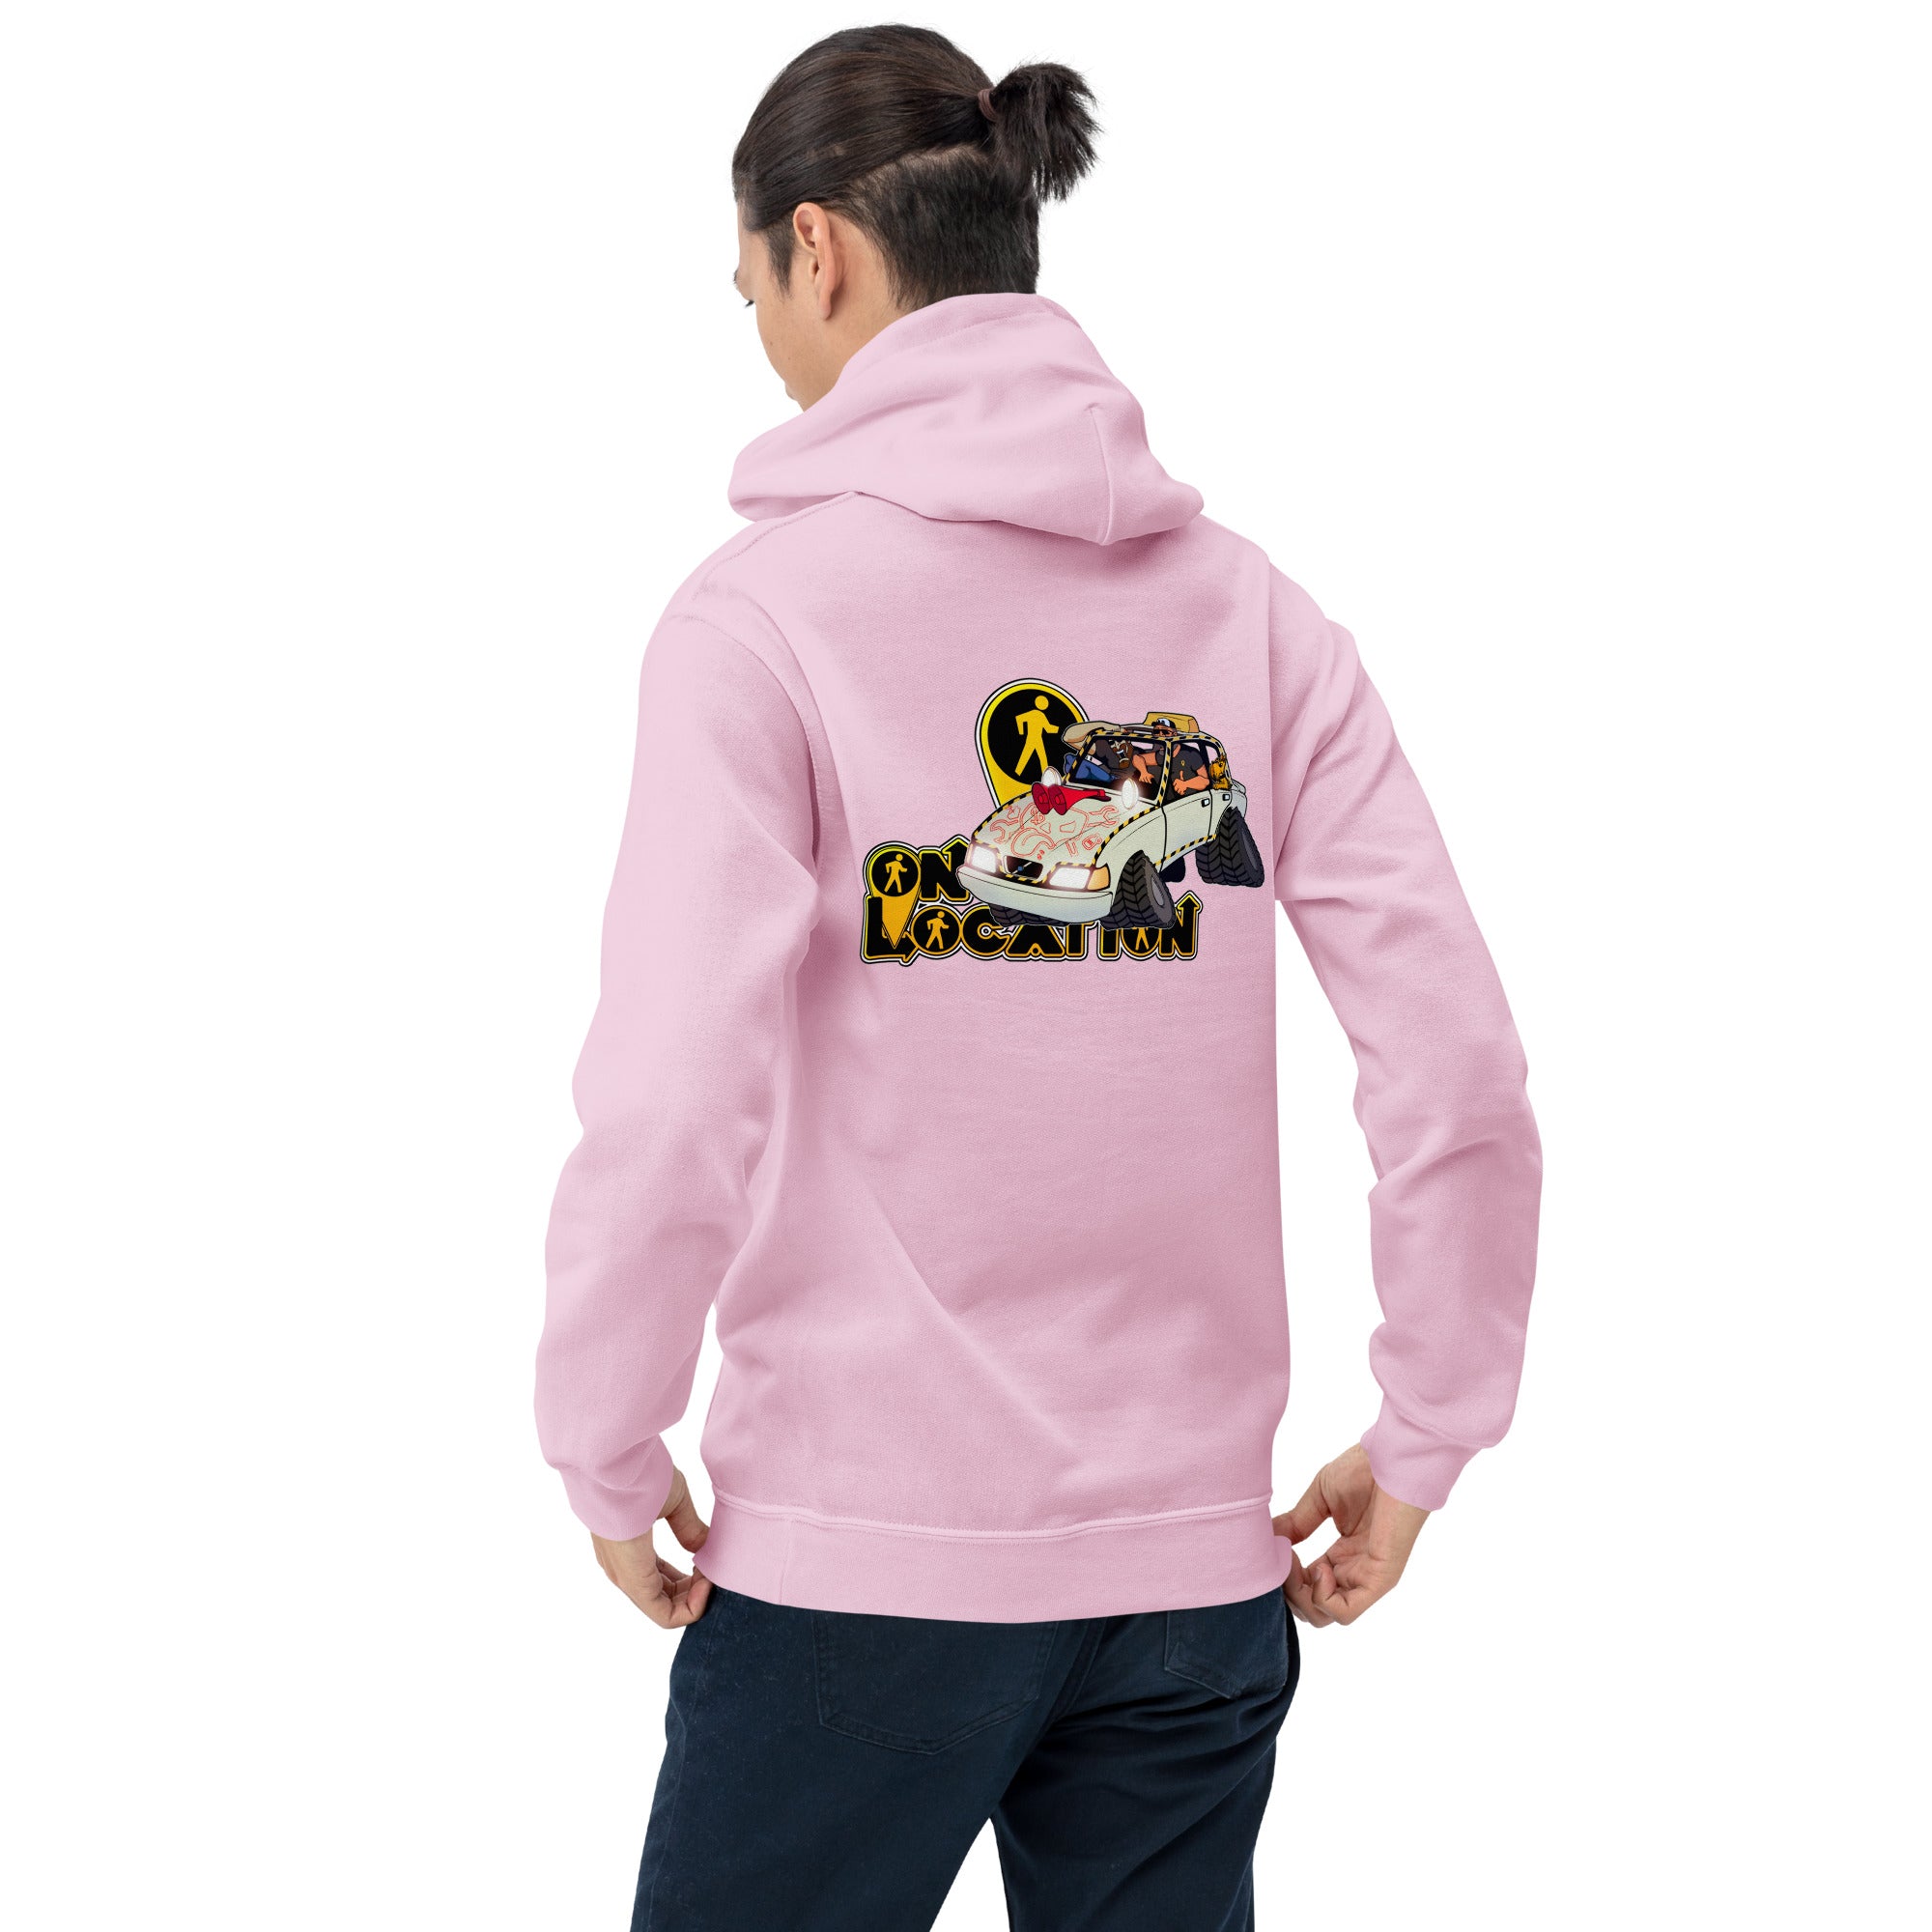 Navigation Driving Challenge Unisex Hoodie - Back Graphic (multiple colors)